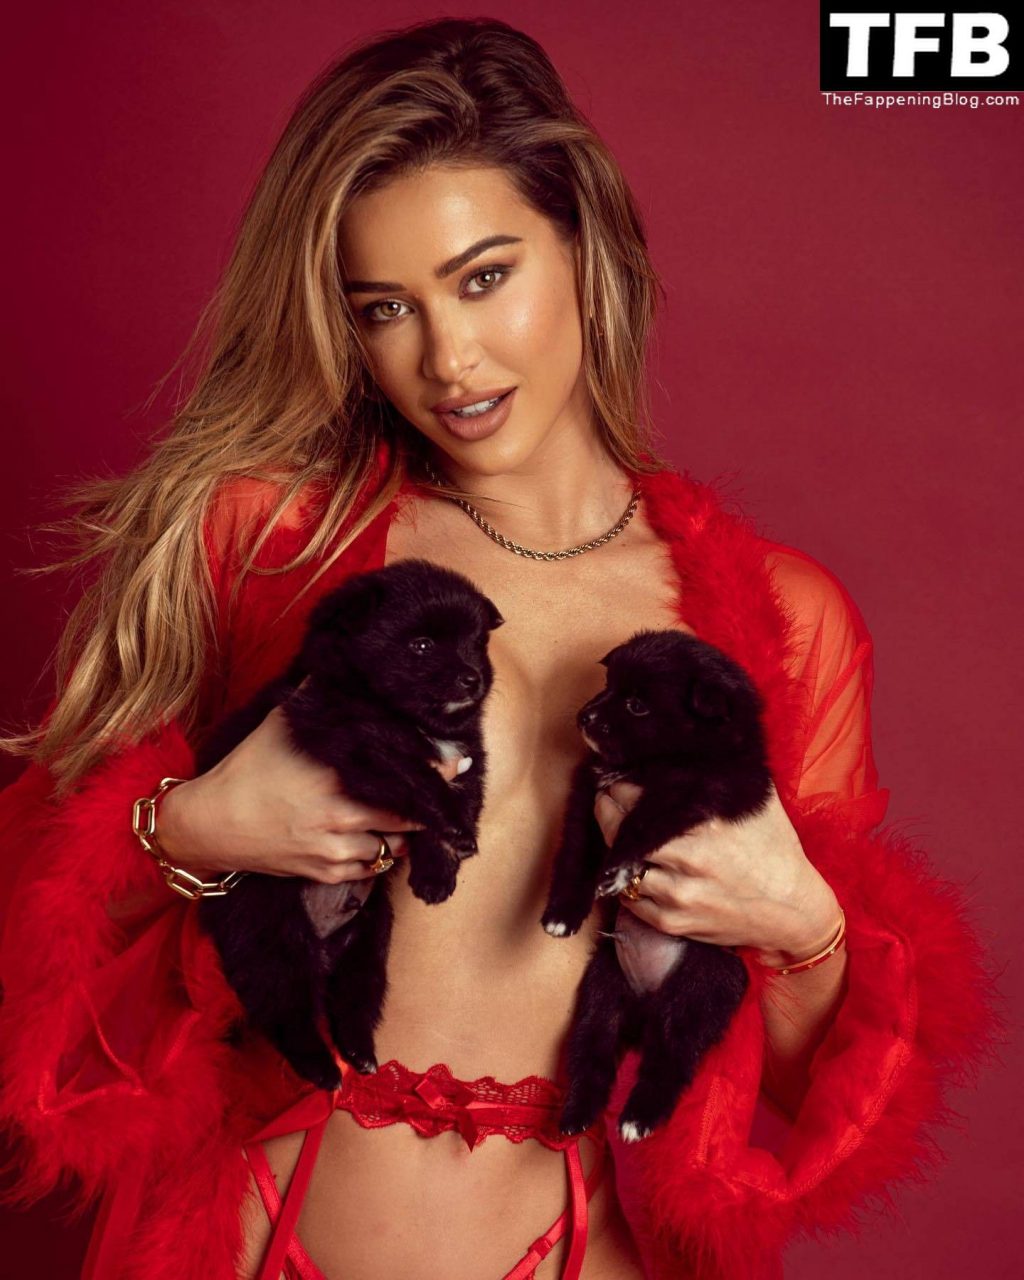 Cindy Prado Displays Her Sexy Figure in Red Lingerie (8 Photos)